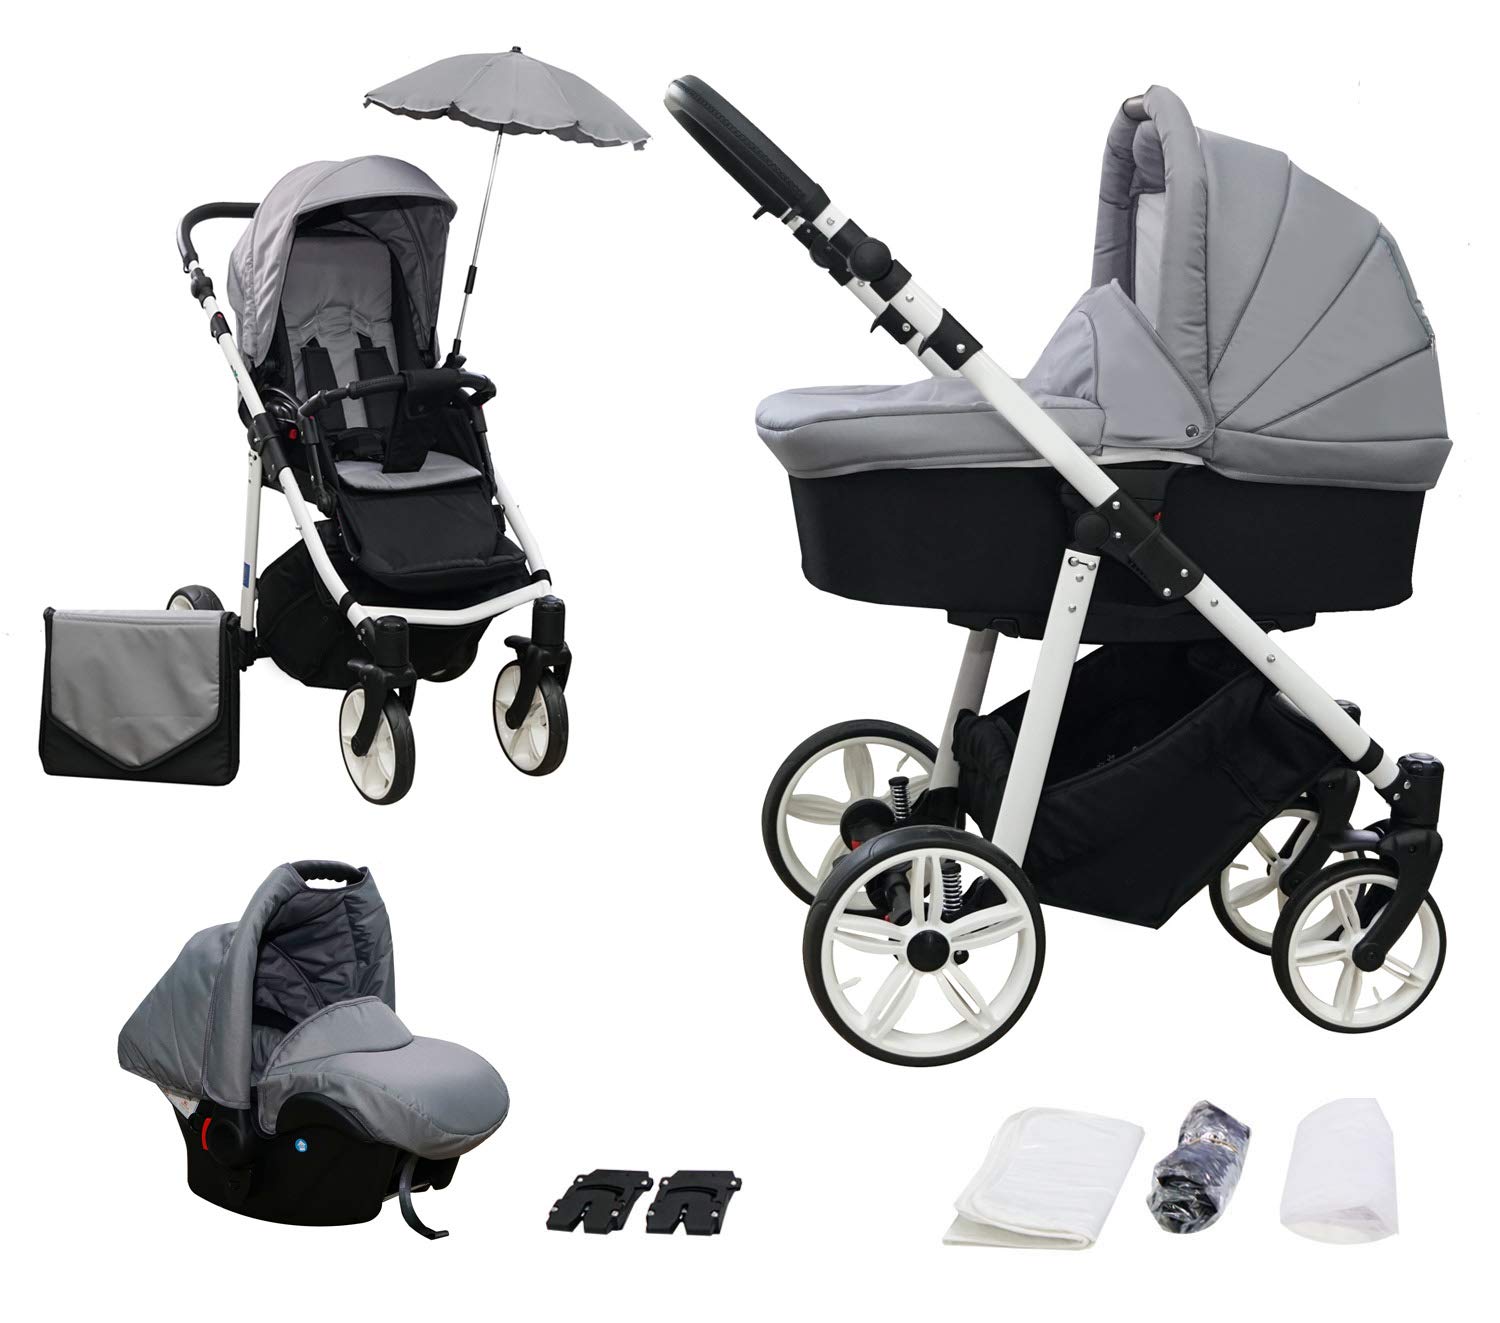 Skyline 3-In-1 Combination Pram With Aluminum Frame, Baby Cot, Sports Buggy